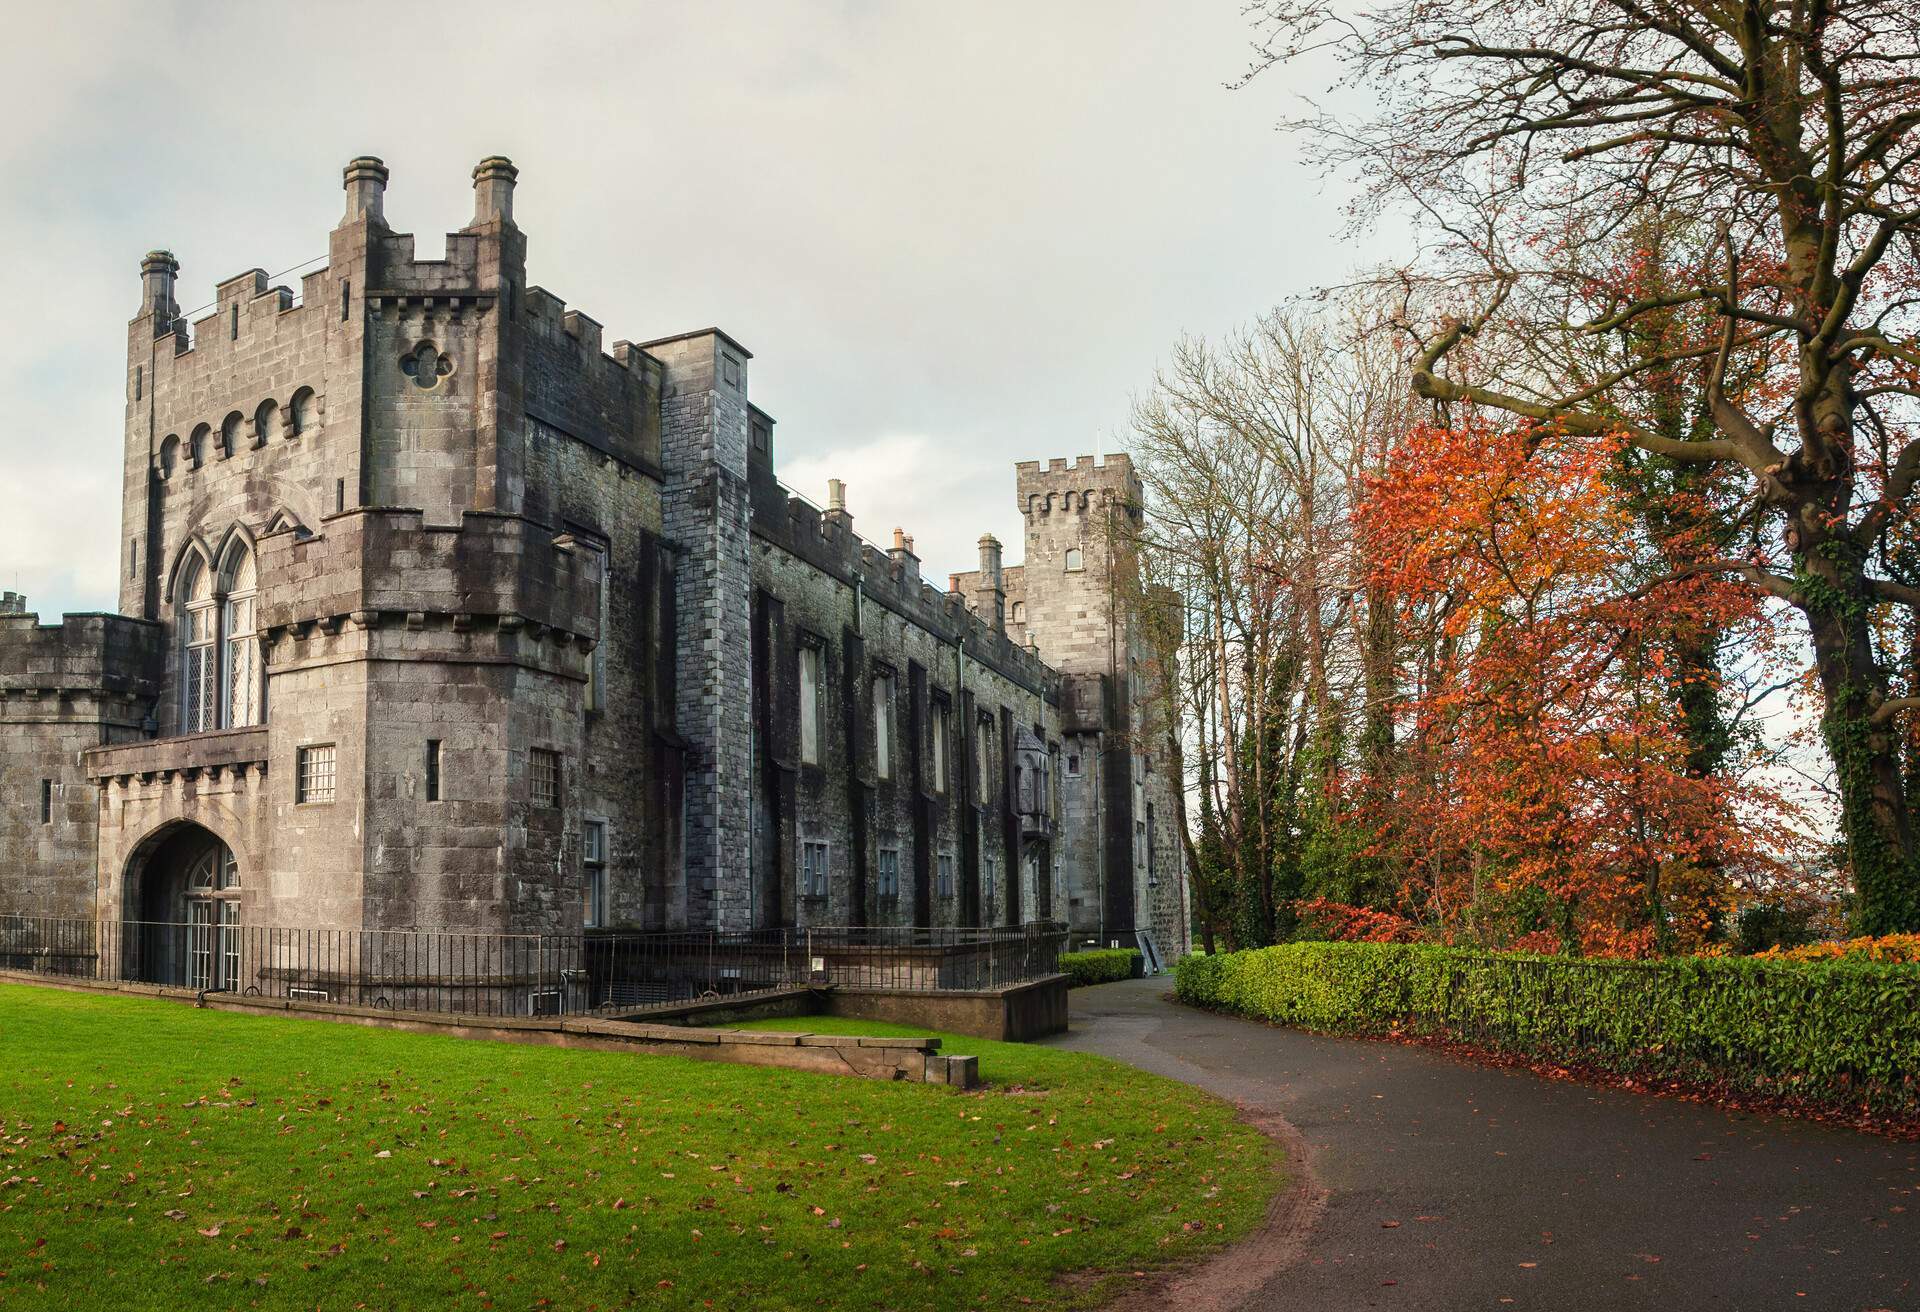 Kilkenny Castle and gardens in autumn with heavy clouds. It is one of the most visited tourist sites in Ireland.